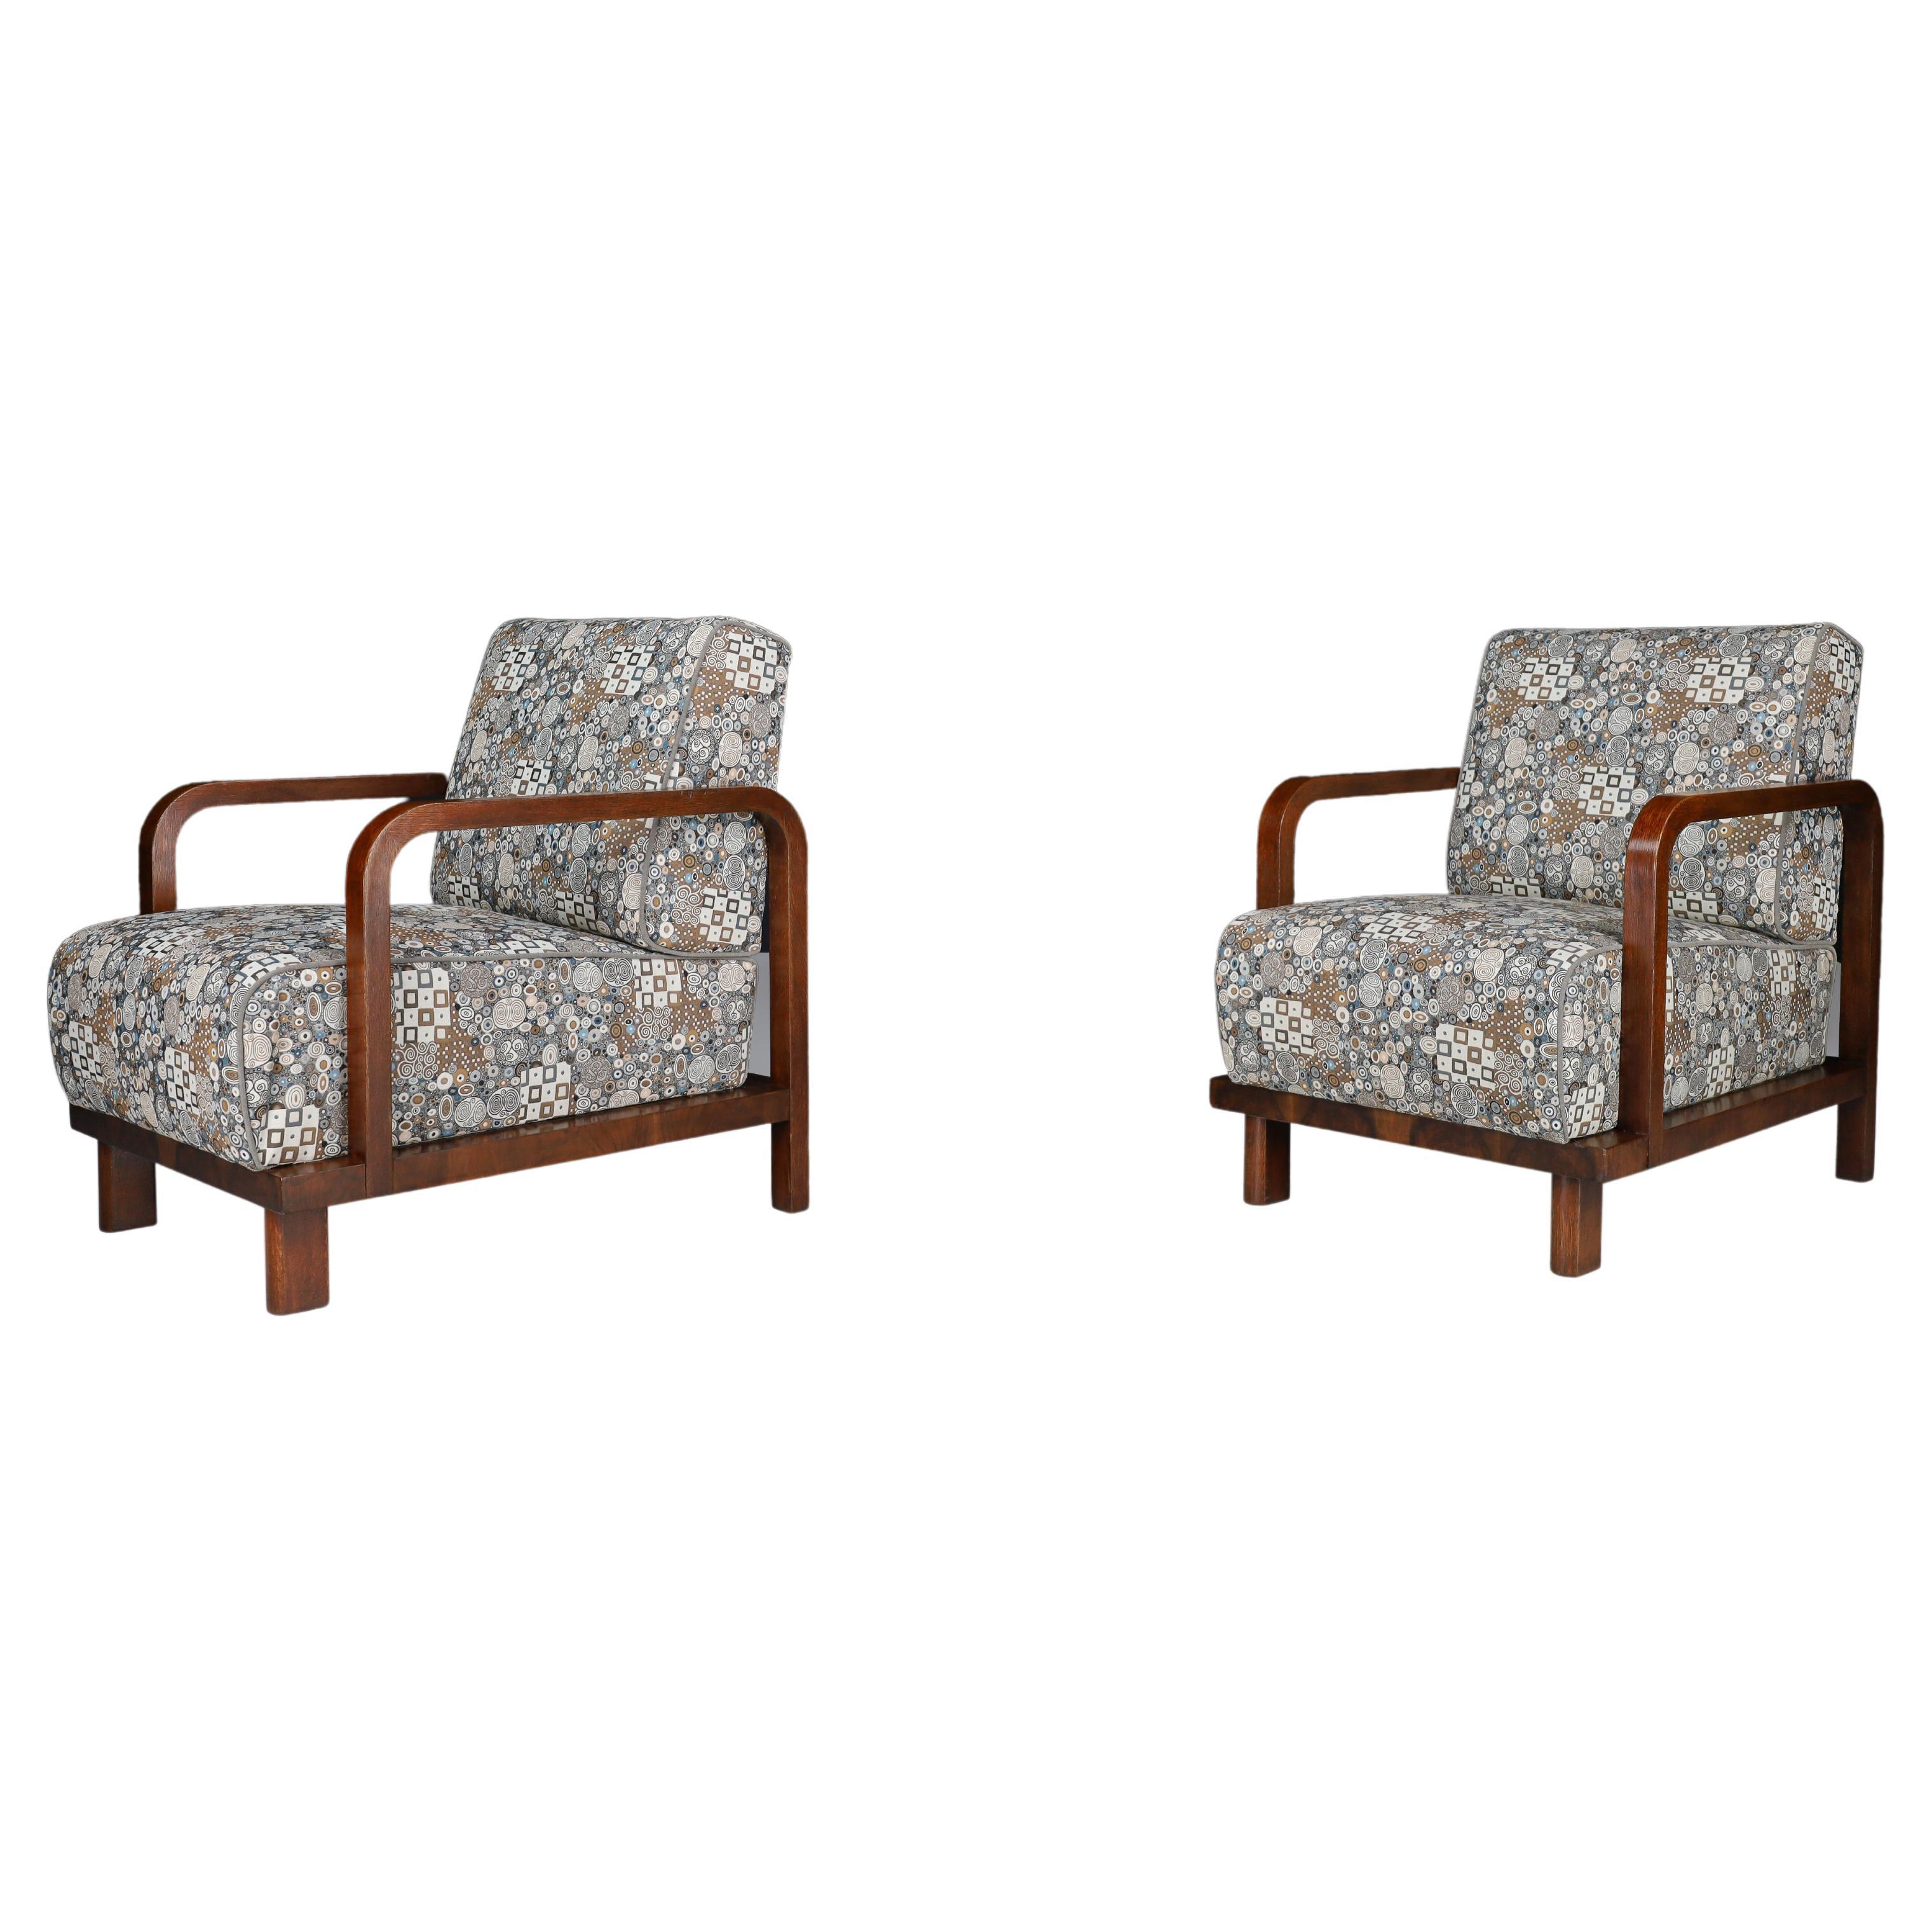 Pair of Two Art Deco Lounge Chairs Re-upholstered  Art Deco Fabric, France 1930s For Sale